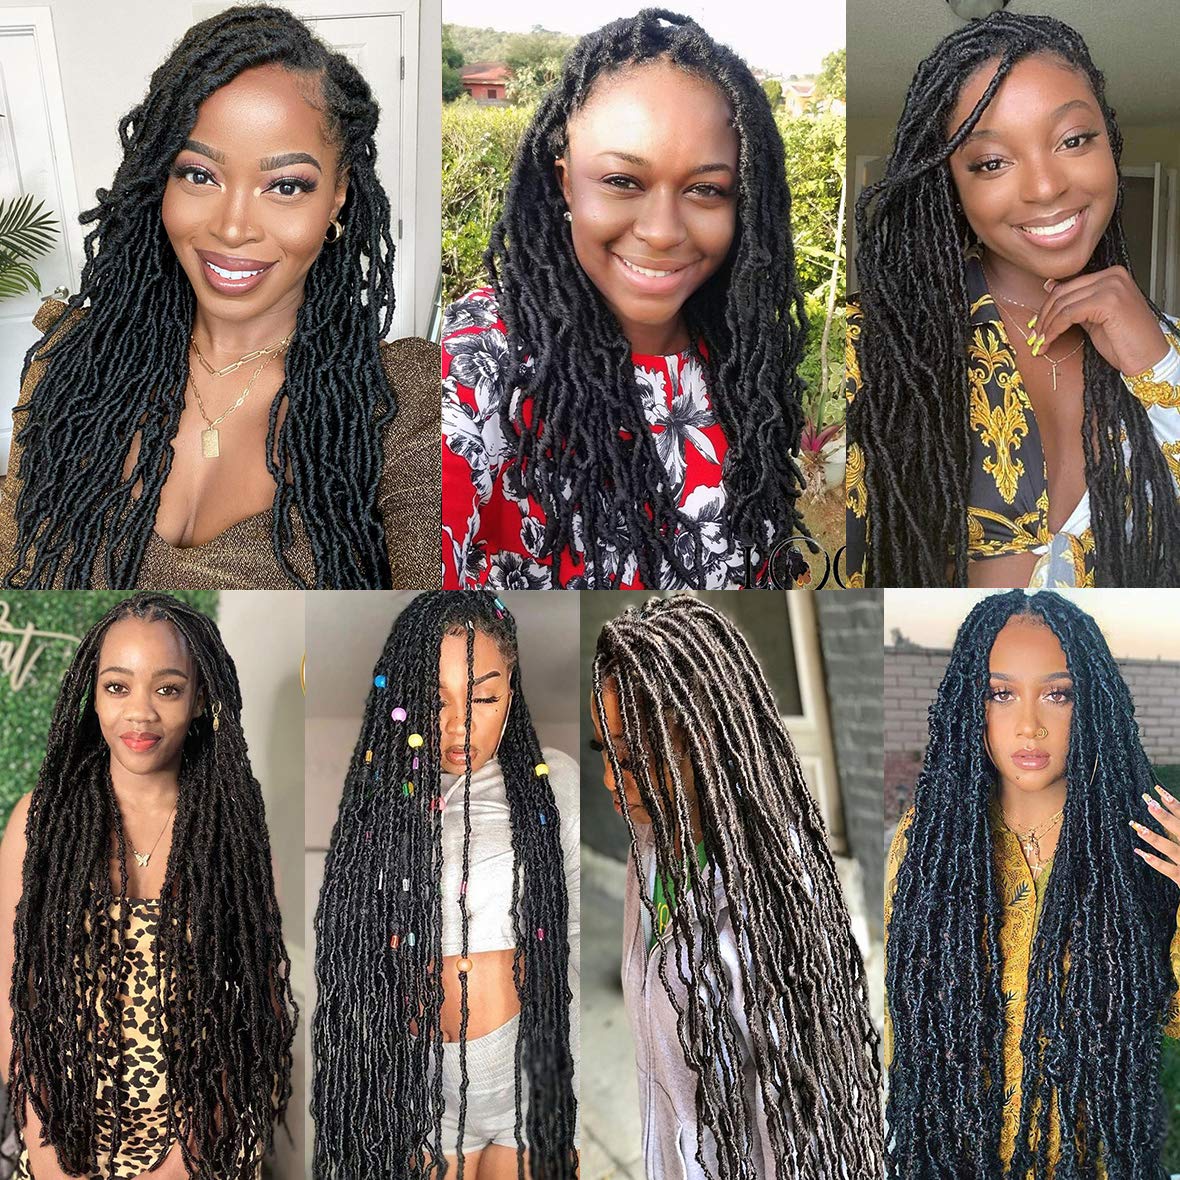 Crochet Hair Braids Soft Natural Extension Faux Locs Braiding Hair Extensions Curly 18 Inch Nu Locs Synthetic Braids